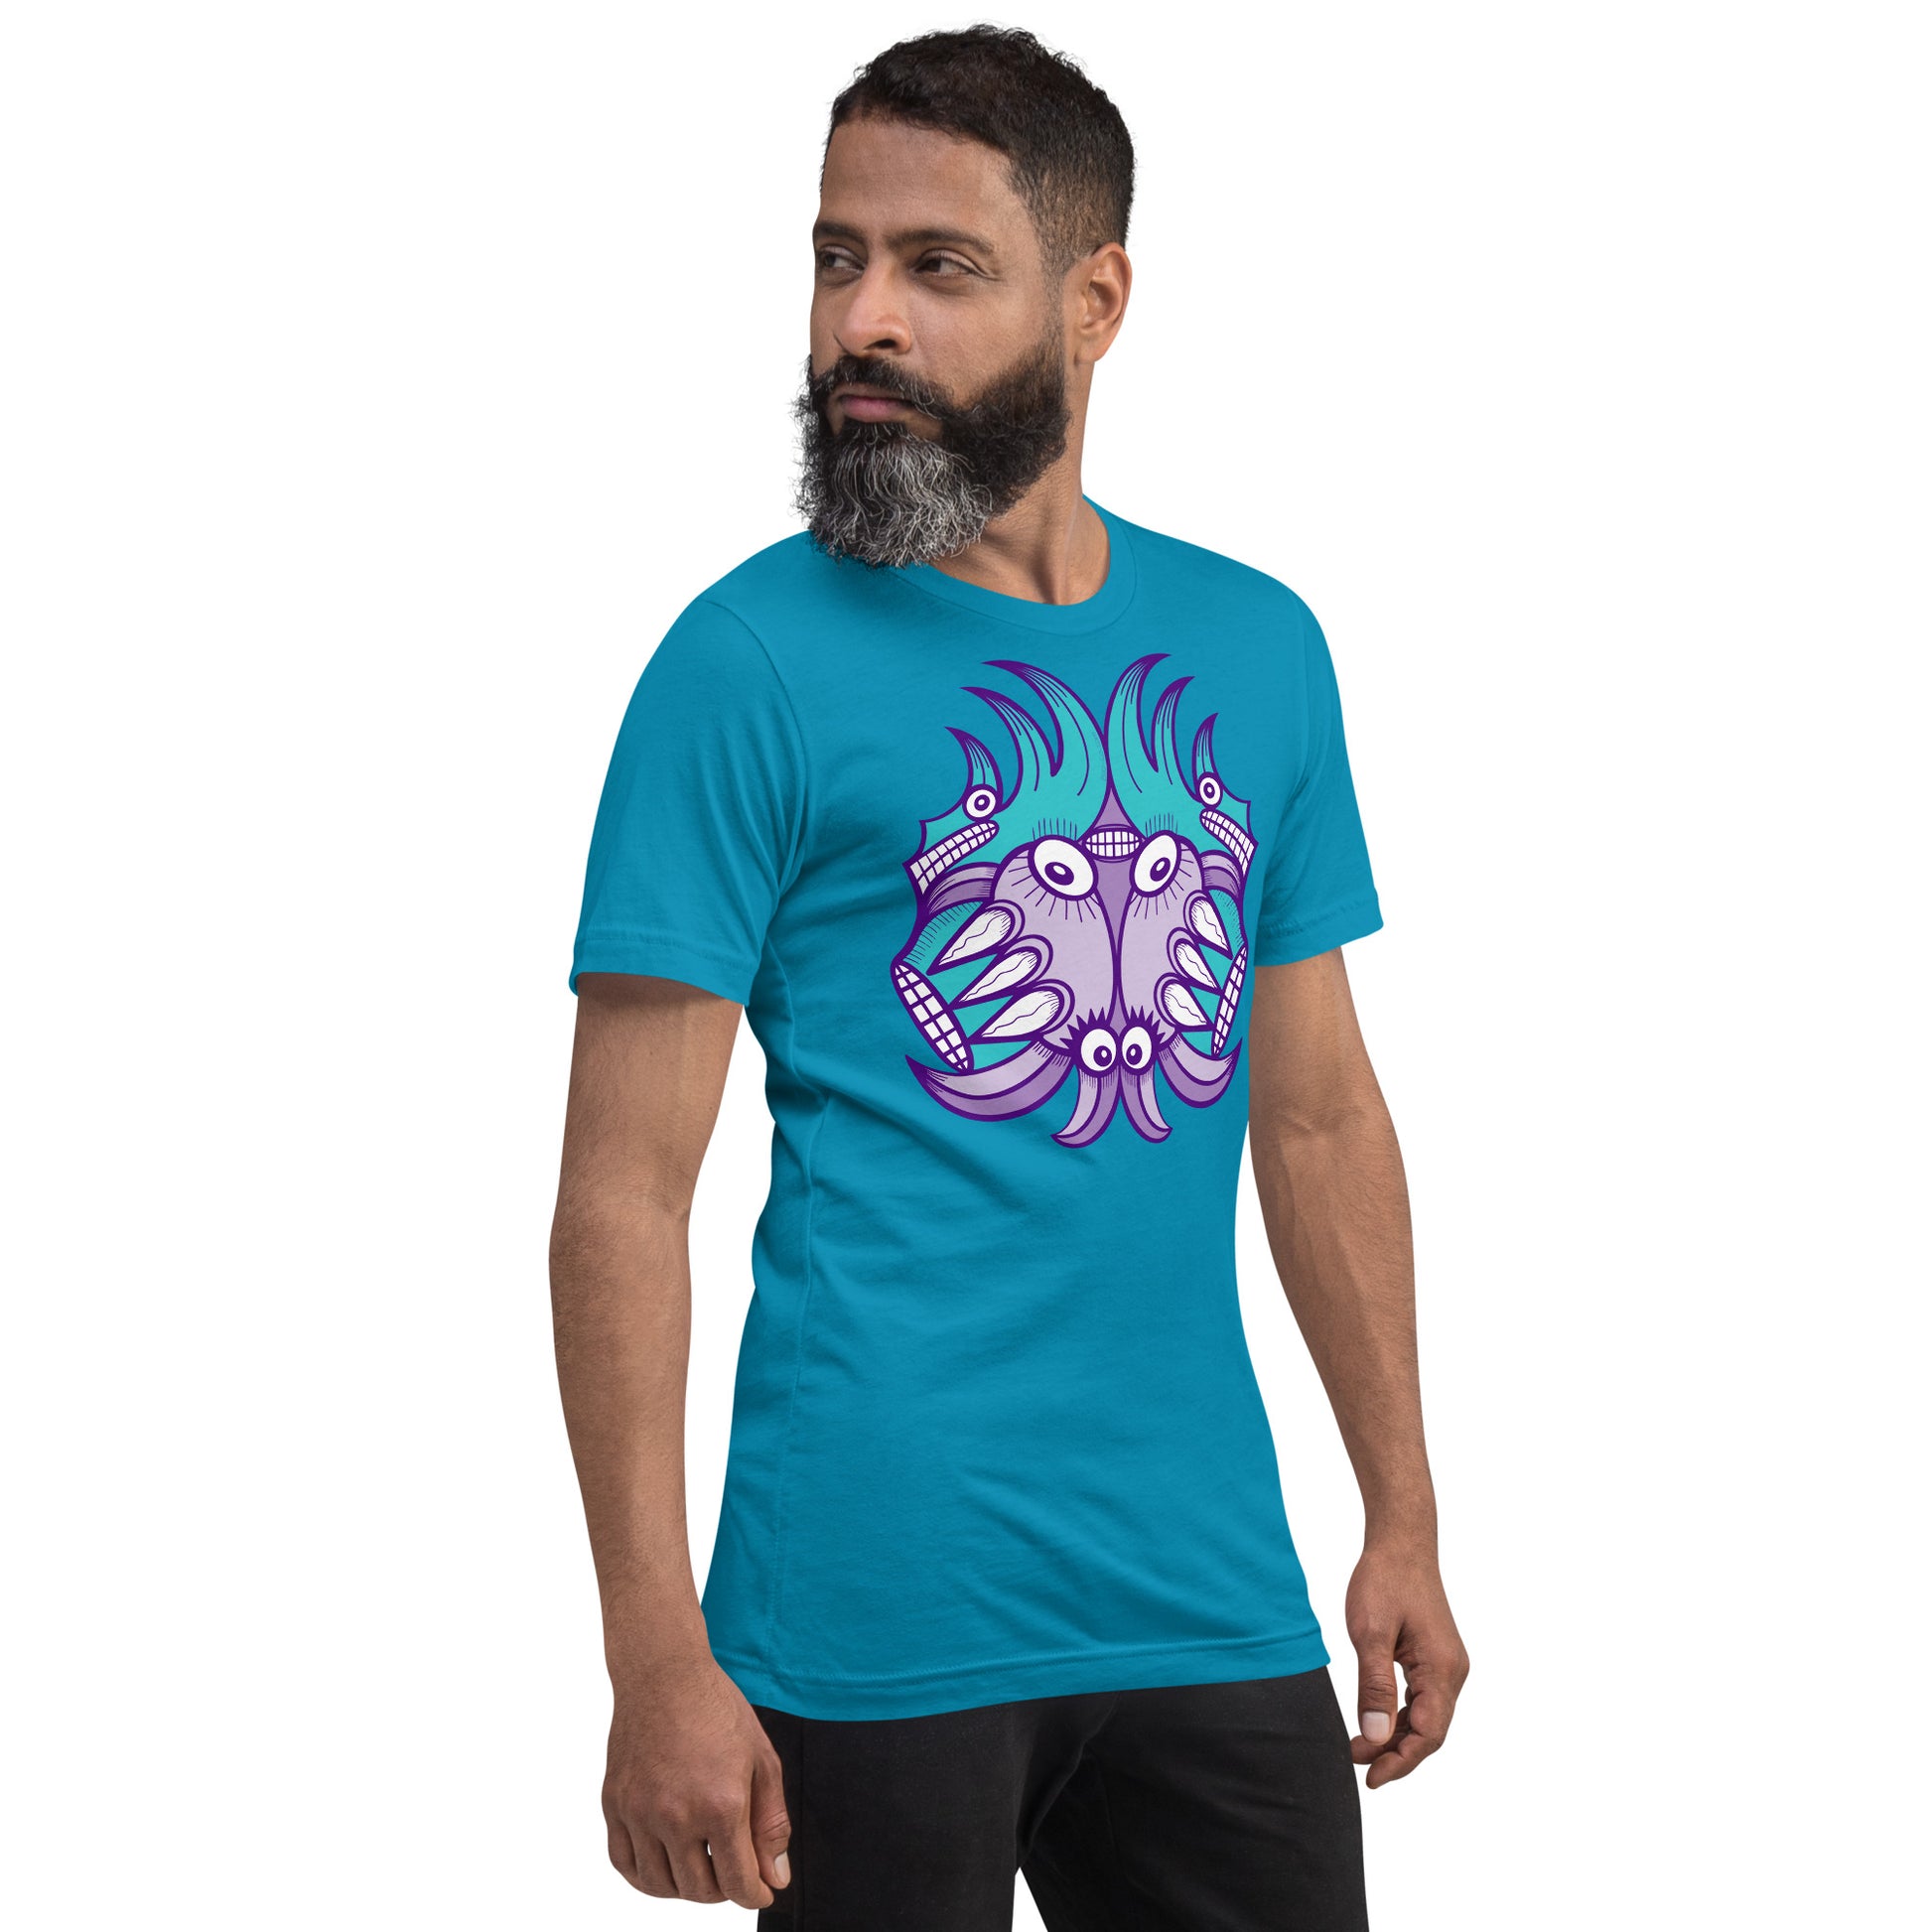 Planet 5: Aquatic Creatures from the Doodles of the Galaxy - Unisex t-shirt. Man wearing an Aqua color model